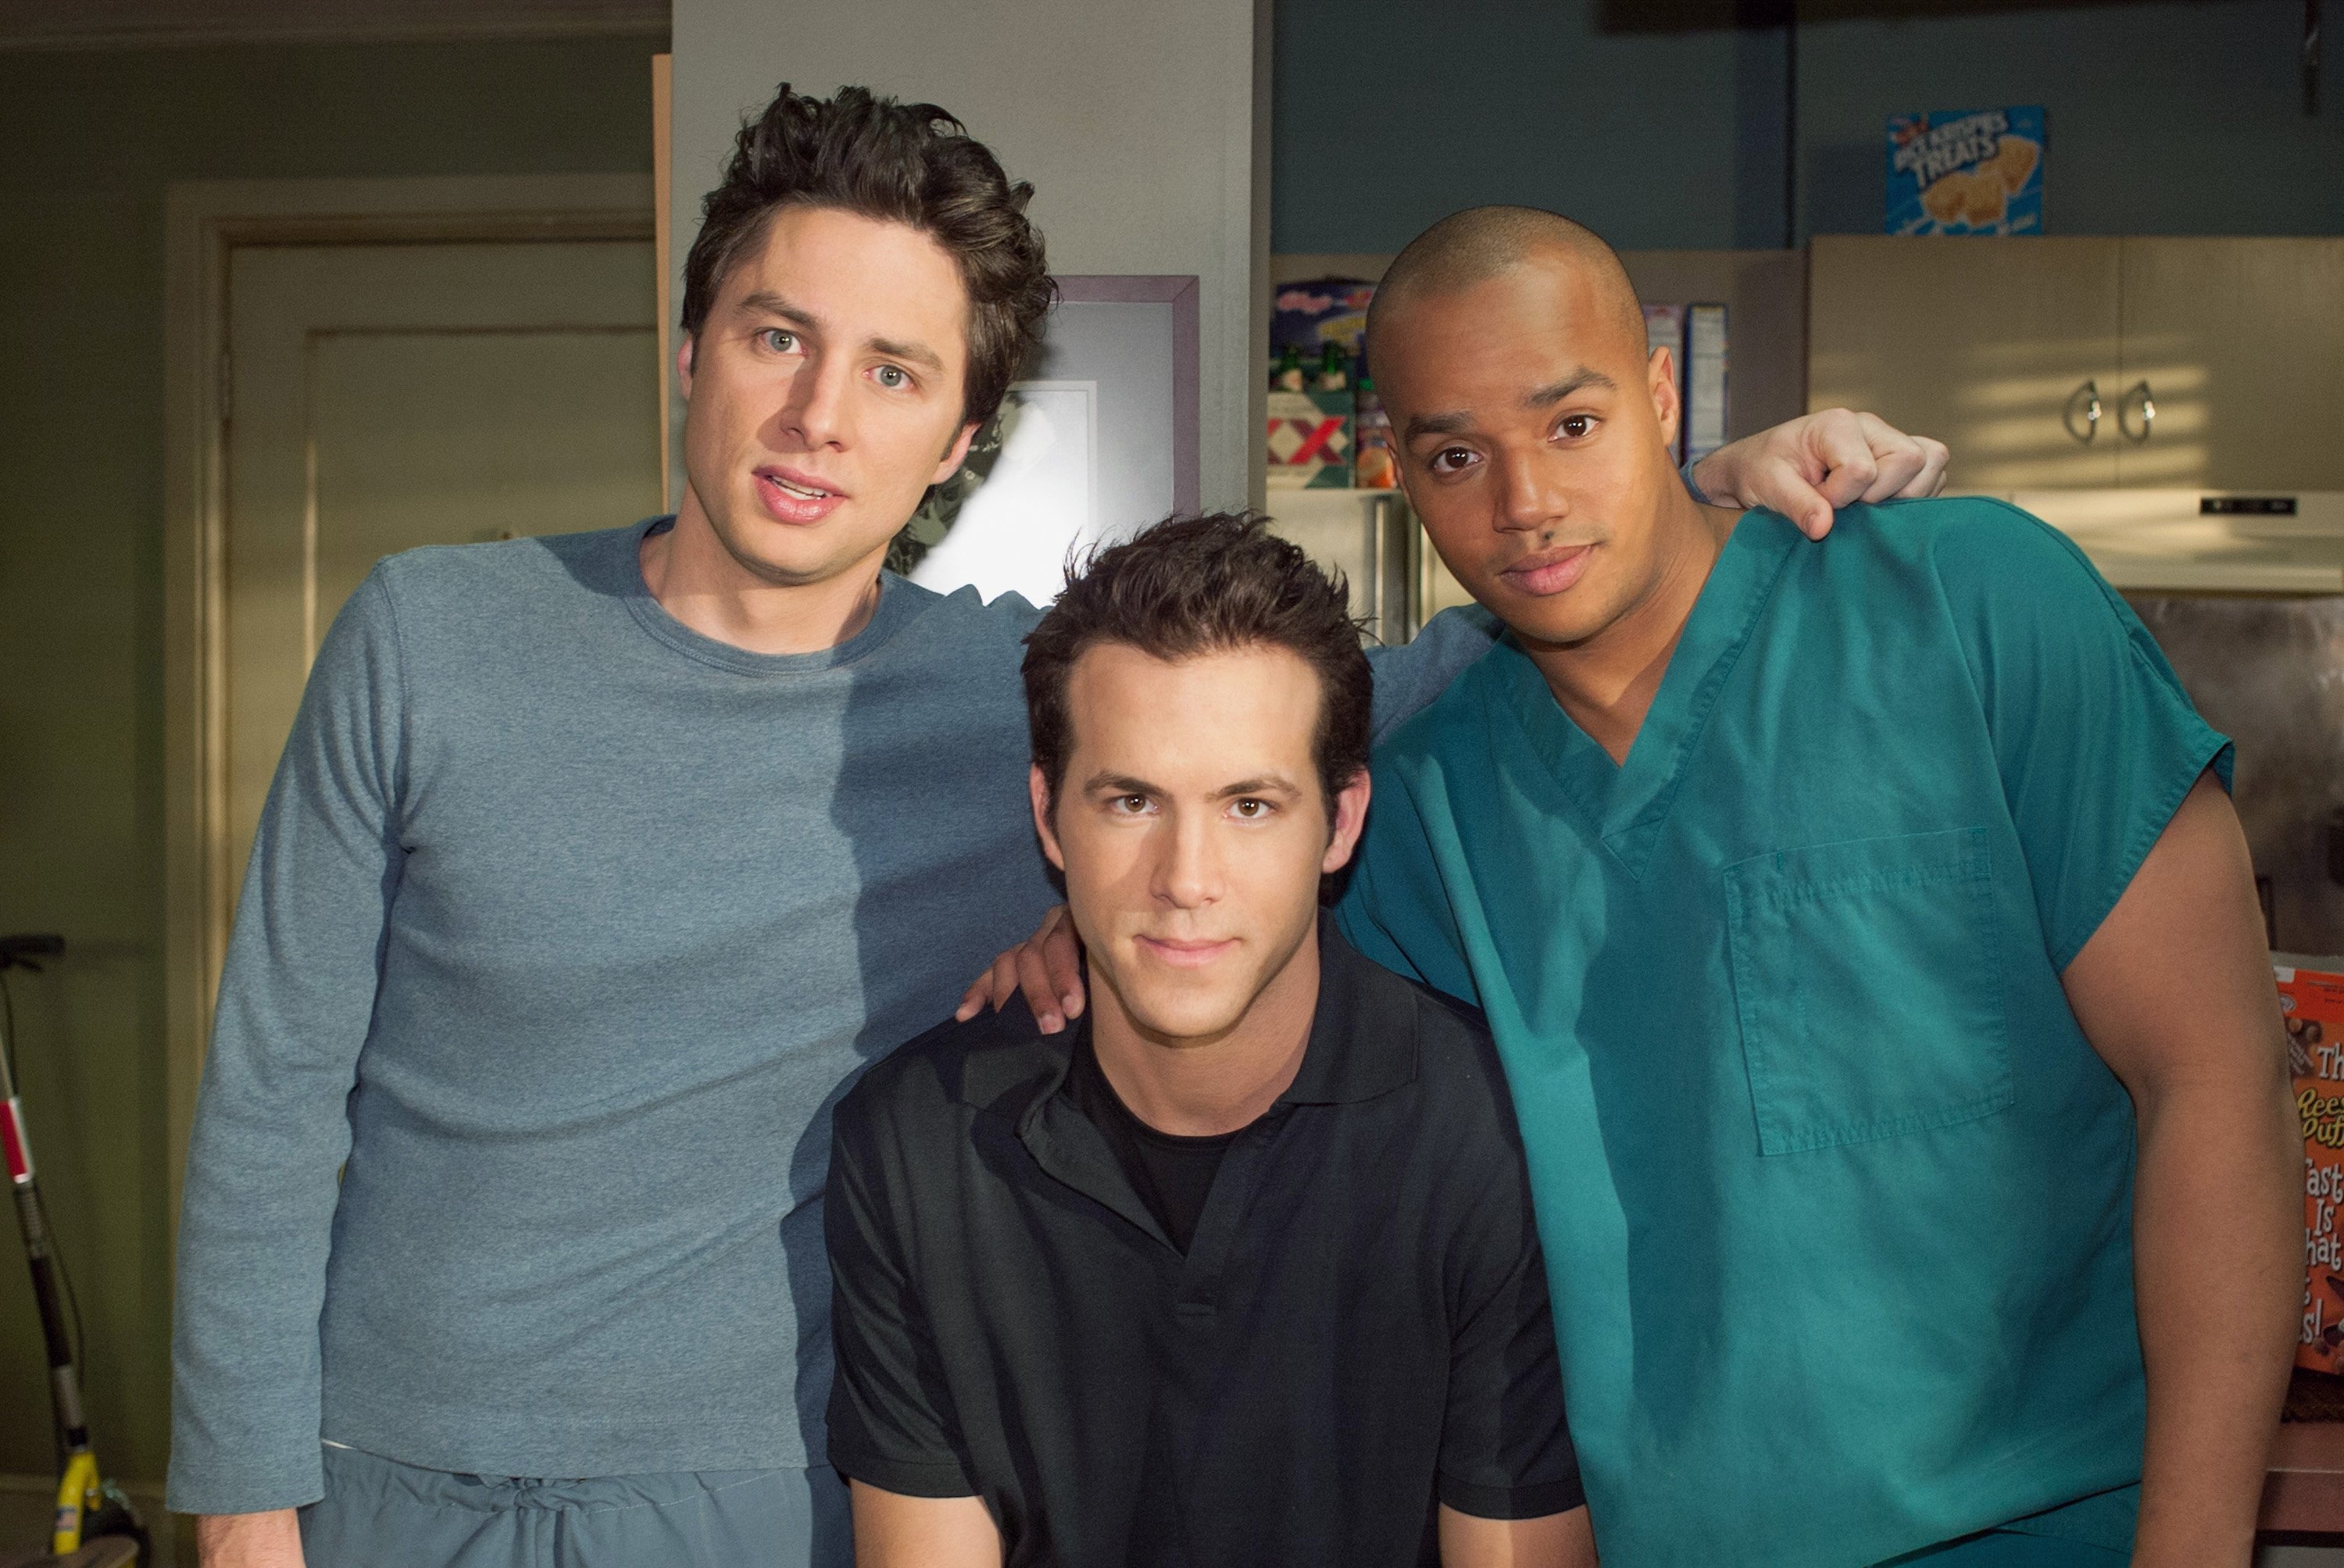 Why Donald Faison Apologized to Ryan Reynolds on His ‘Scrubs’ Podcast With Zach Braff